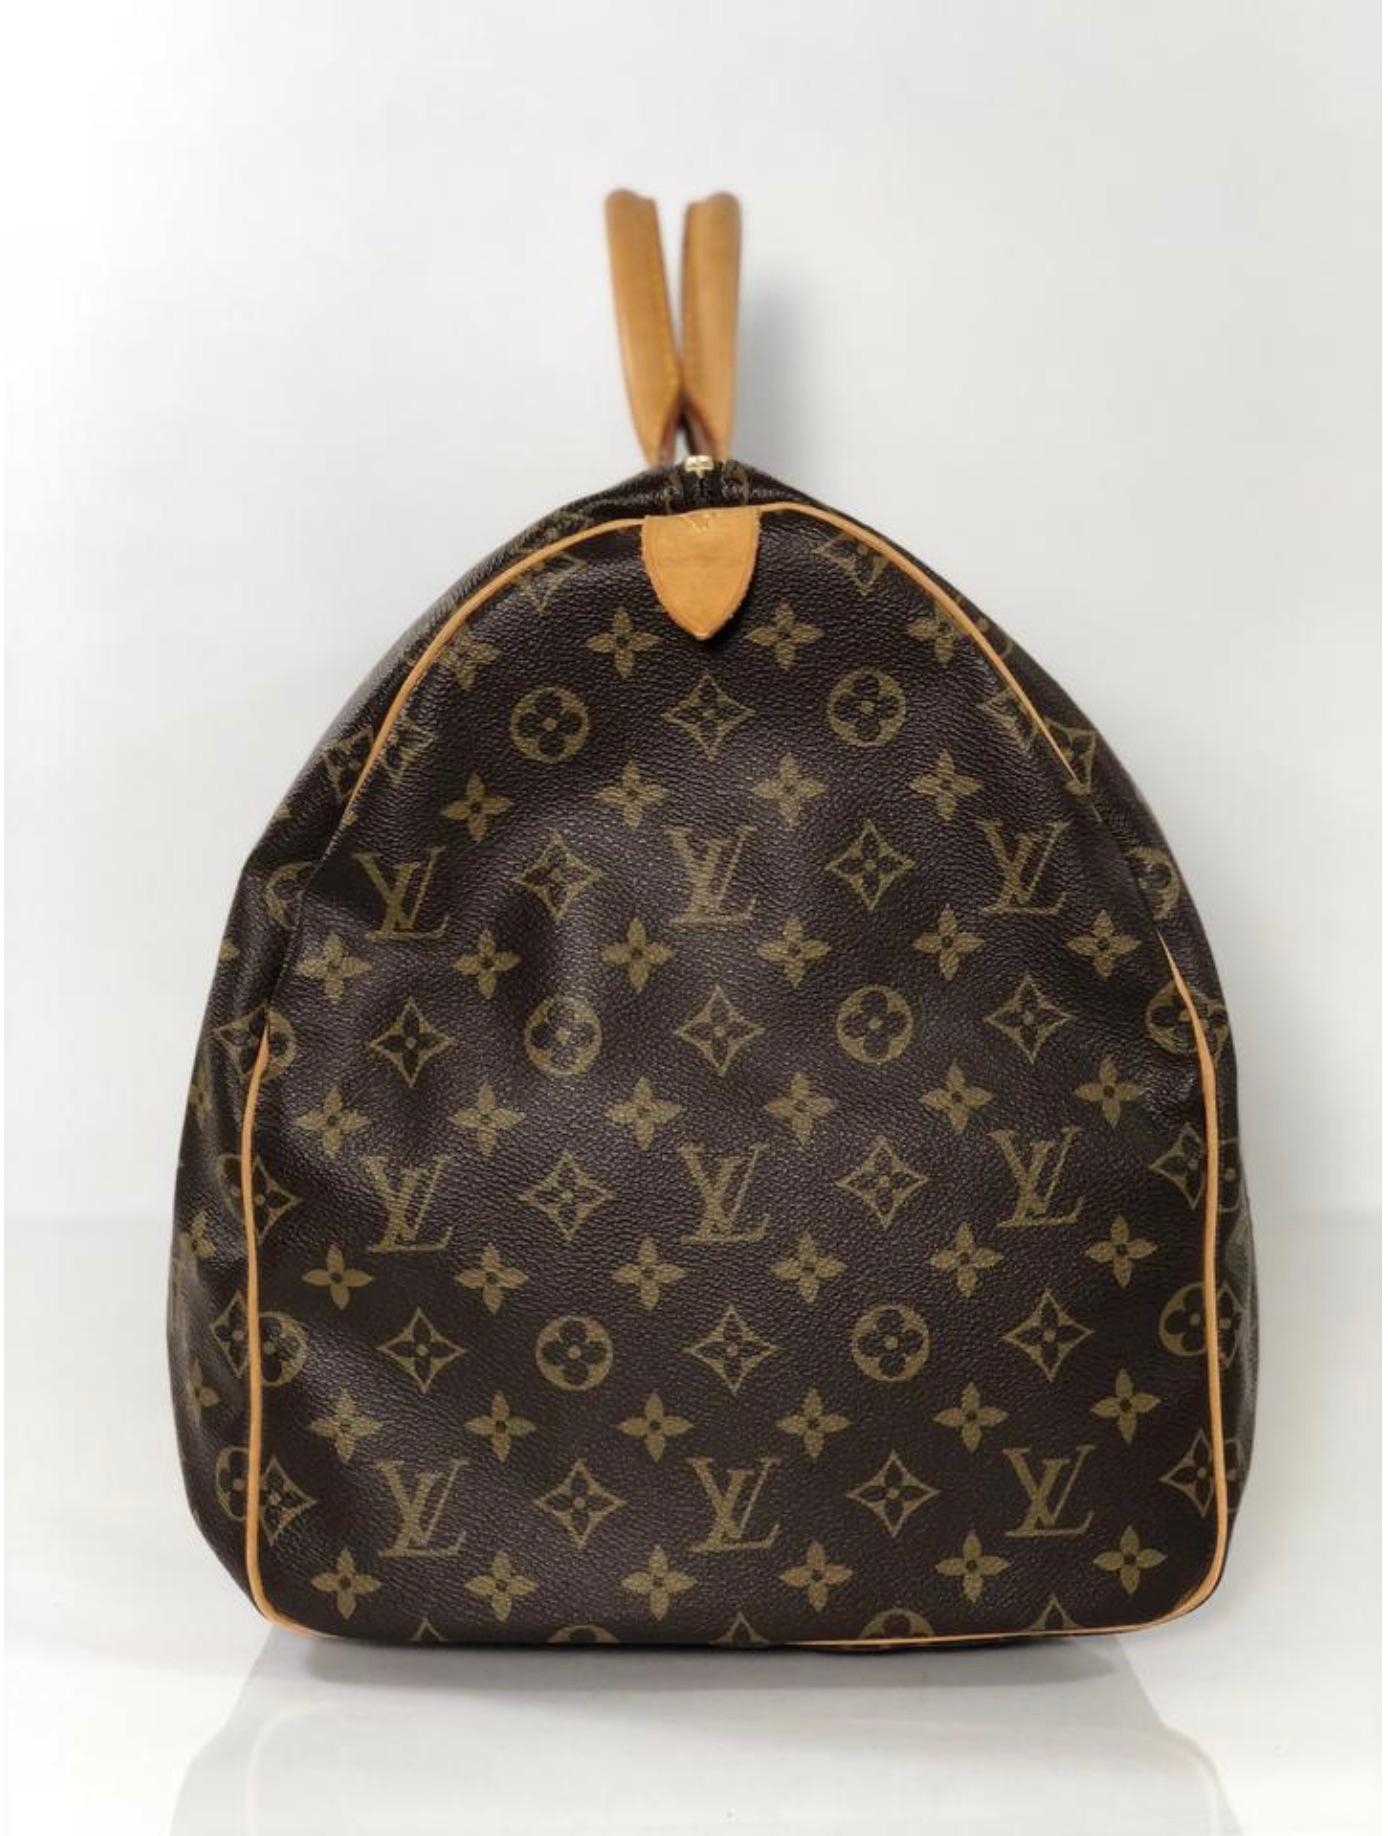 Louis Vuitton Monogram Keepall 55 Travel Handbag In Good Condition For Sale In Saint Charles, IL